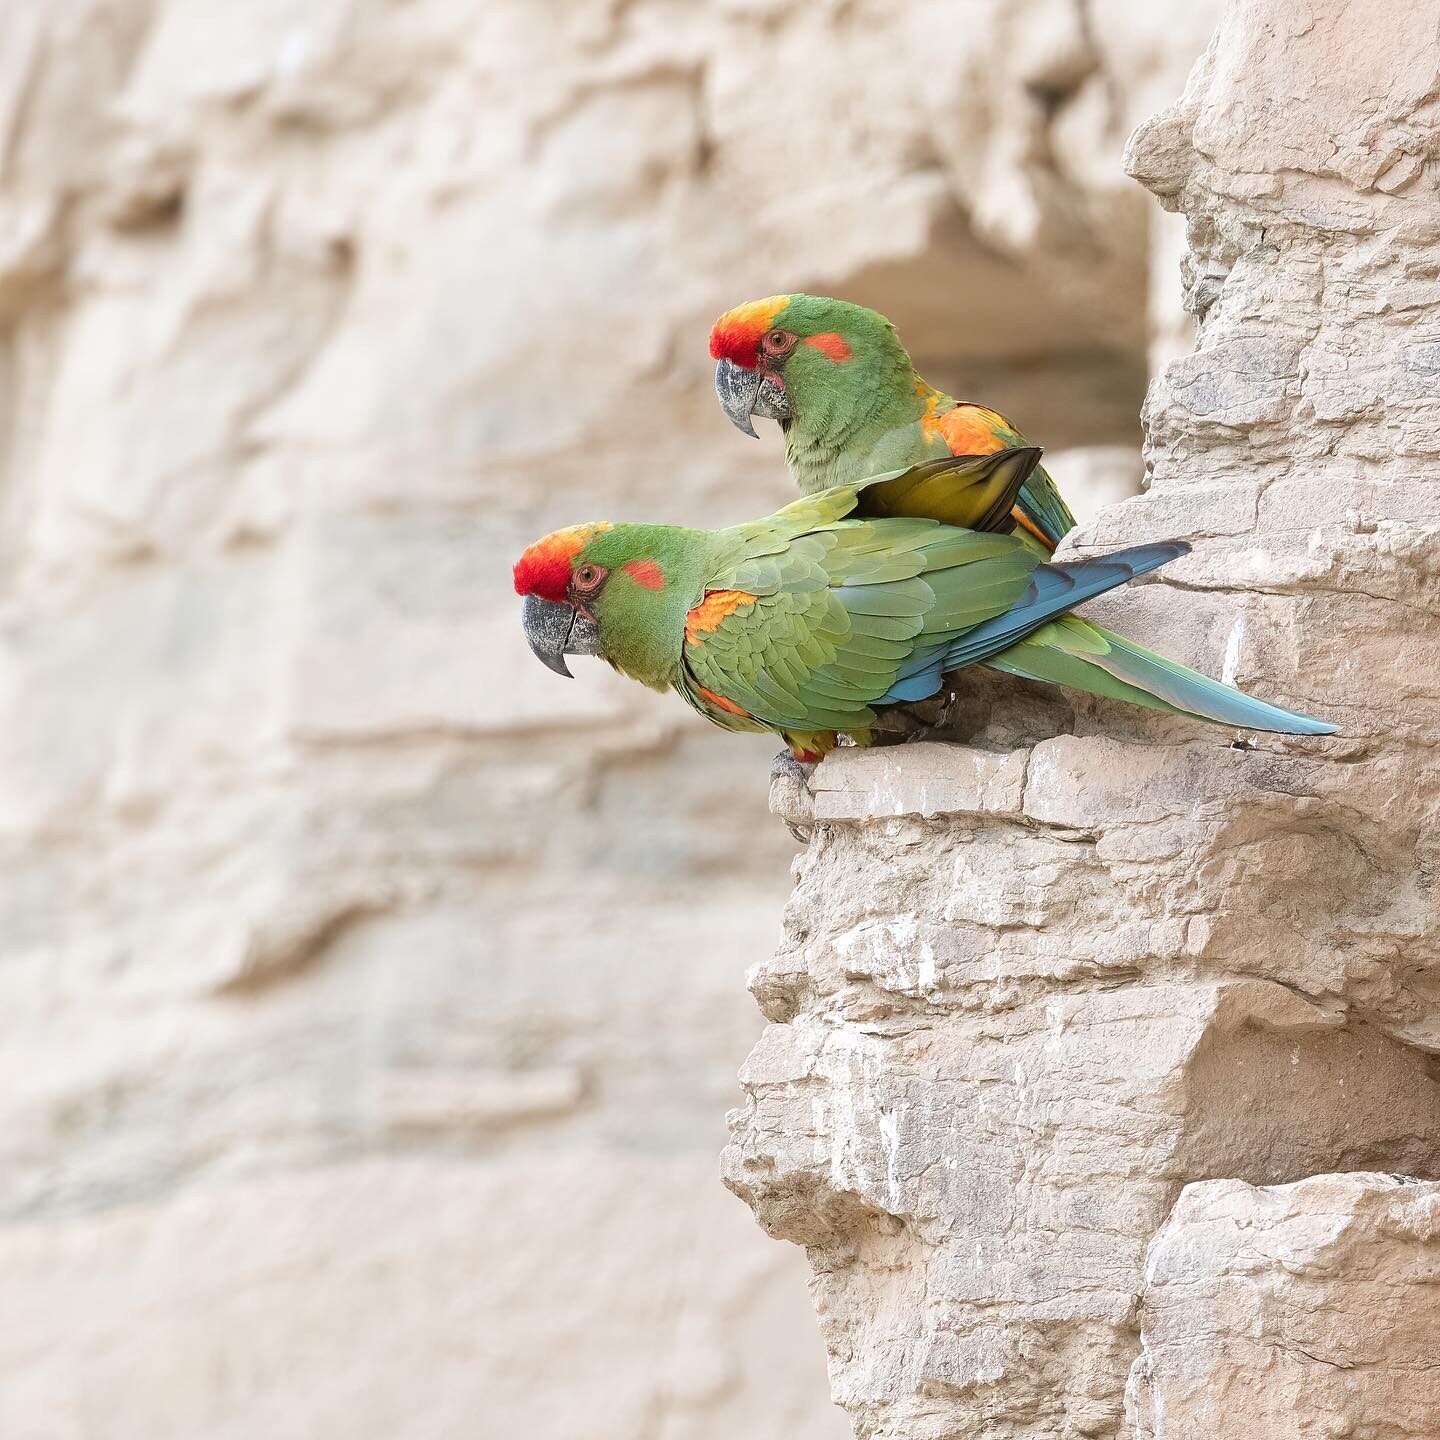 Macaws pair bond for life and have lifespans similar to our own, often living to be 60 or older. So throughout nearly the entire span of a human life these two birds will spend almost every moment within sight of each other, often flying so close tha